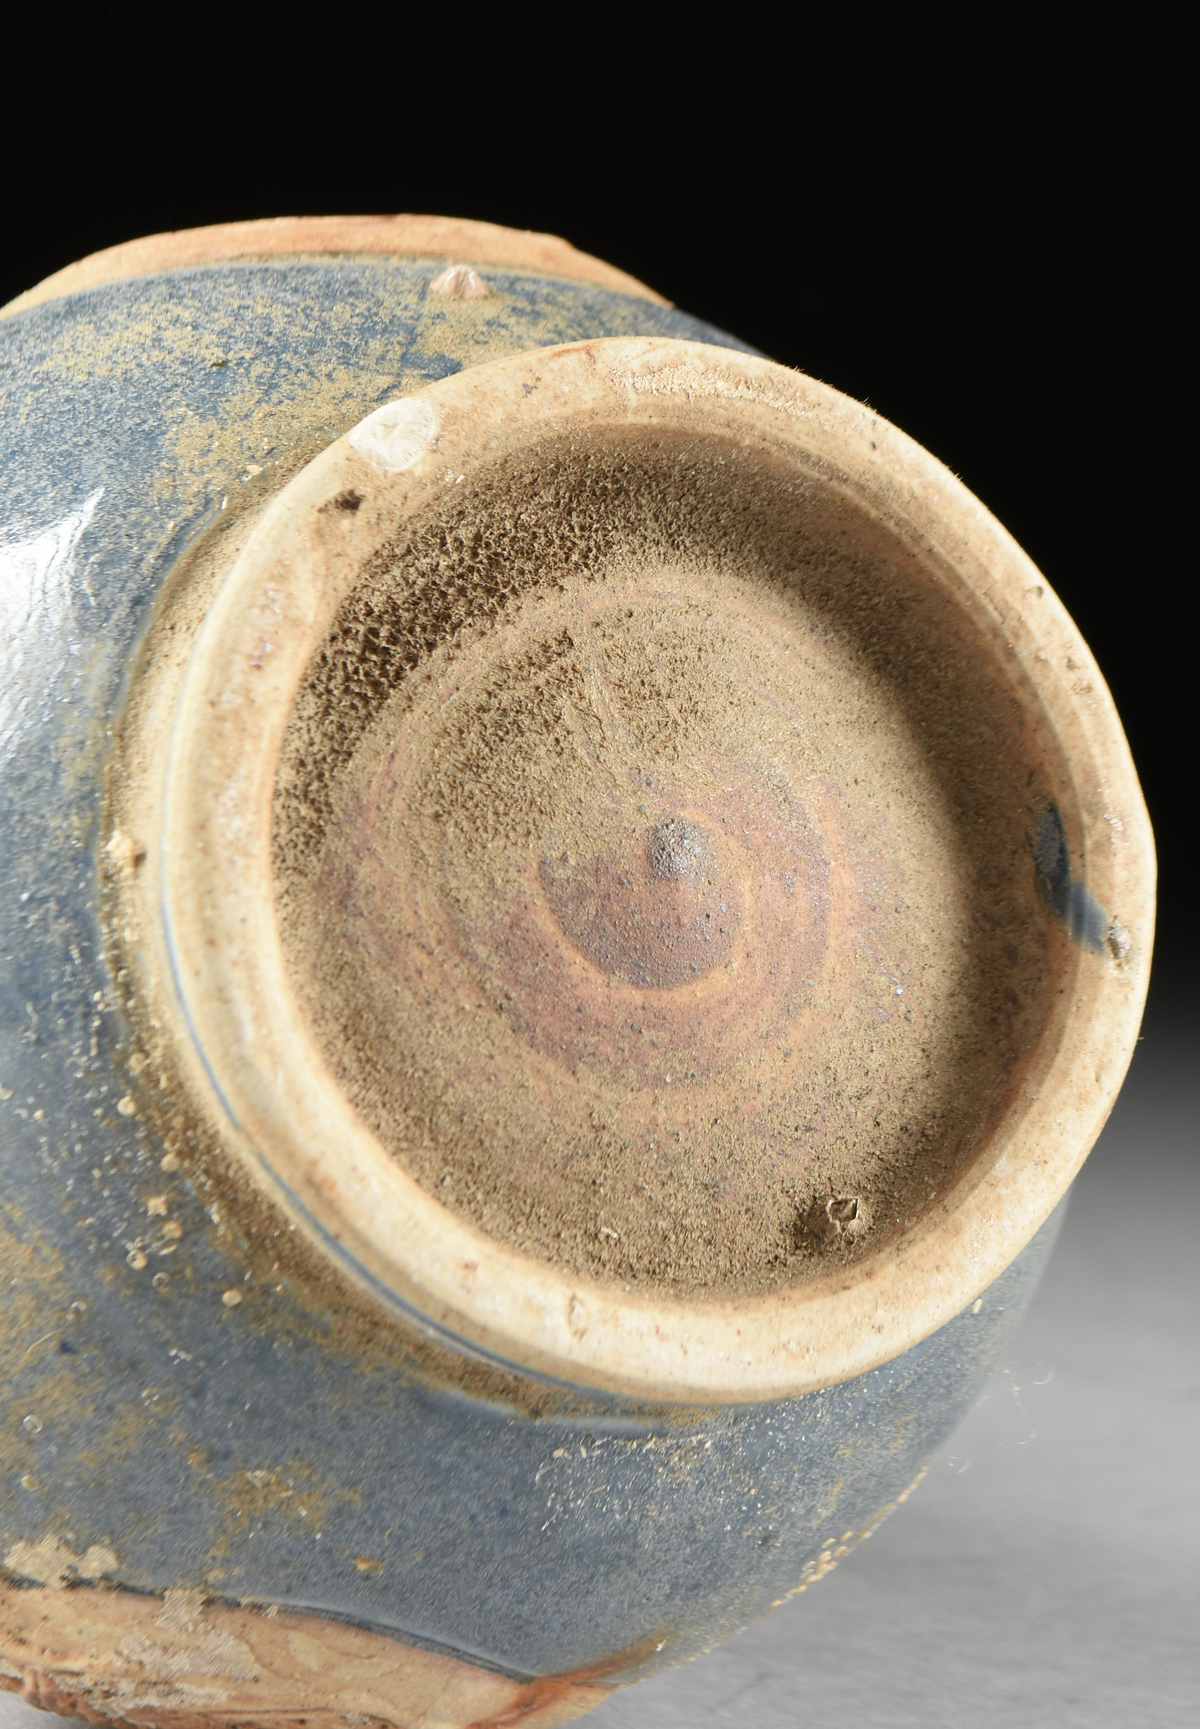 A VIETNAMESE/ANNAMESE BLUE GLAZED DOUBLE GOURD PORCELAIN EWER, SHIPWRECK ARTIFACT, 15TH/16TH - Image 11 of 11